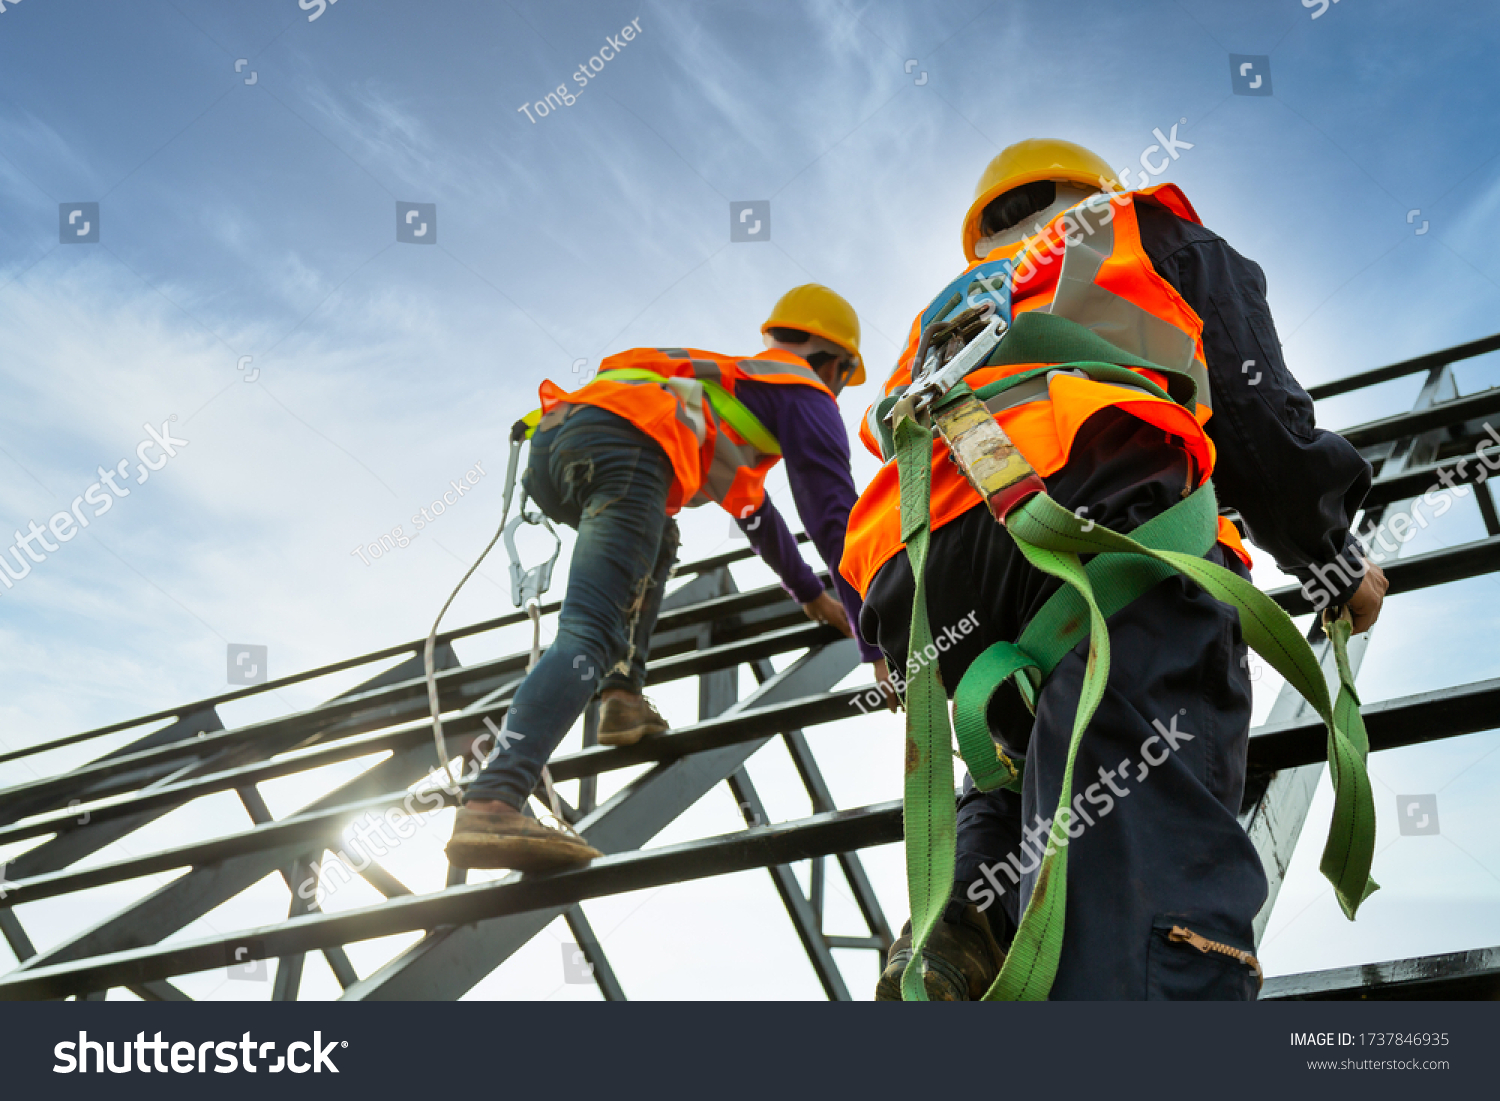 Safety body construction, Working at height equipment. Fall arrestor device for worker with hooks for safety body harness on the roof structure #1737846935